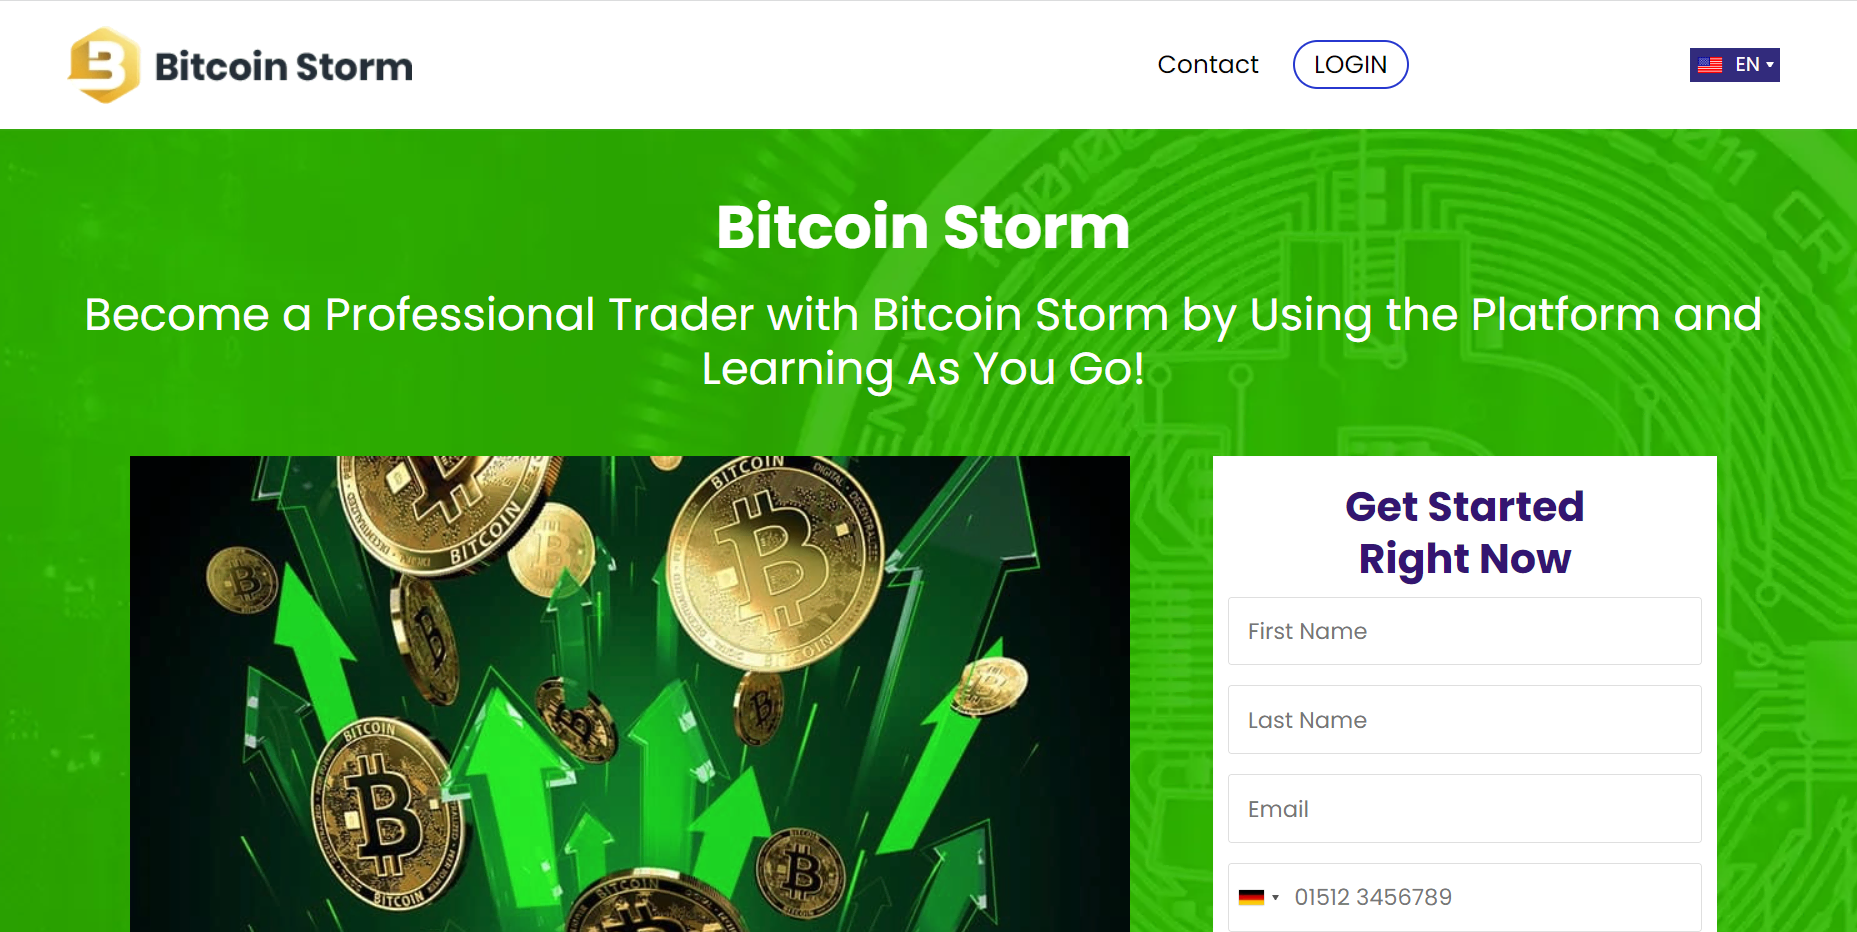 the official website of Bitcoin Storm